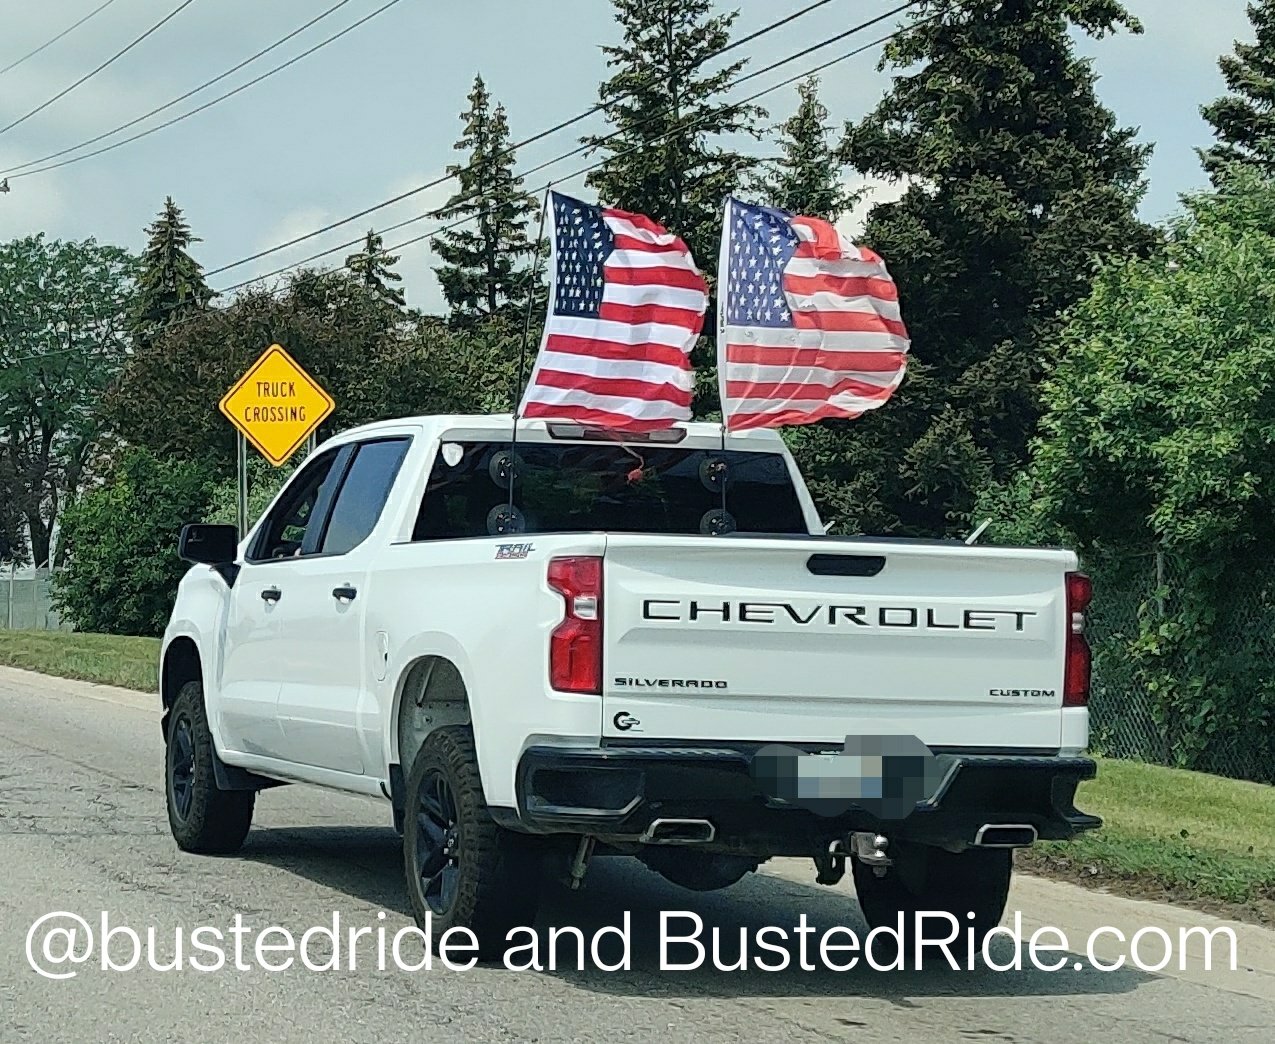 Happy Birthday to America - News by Busted Ride